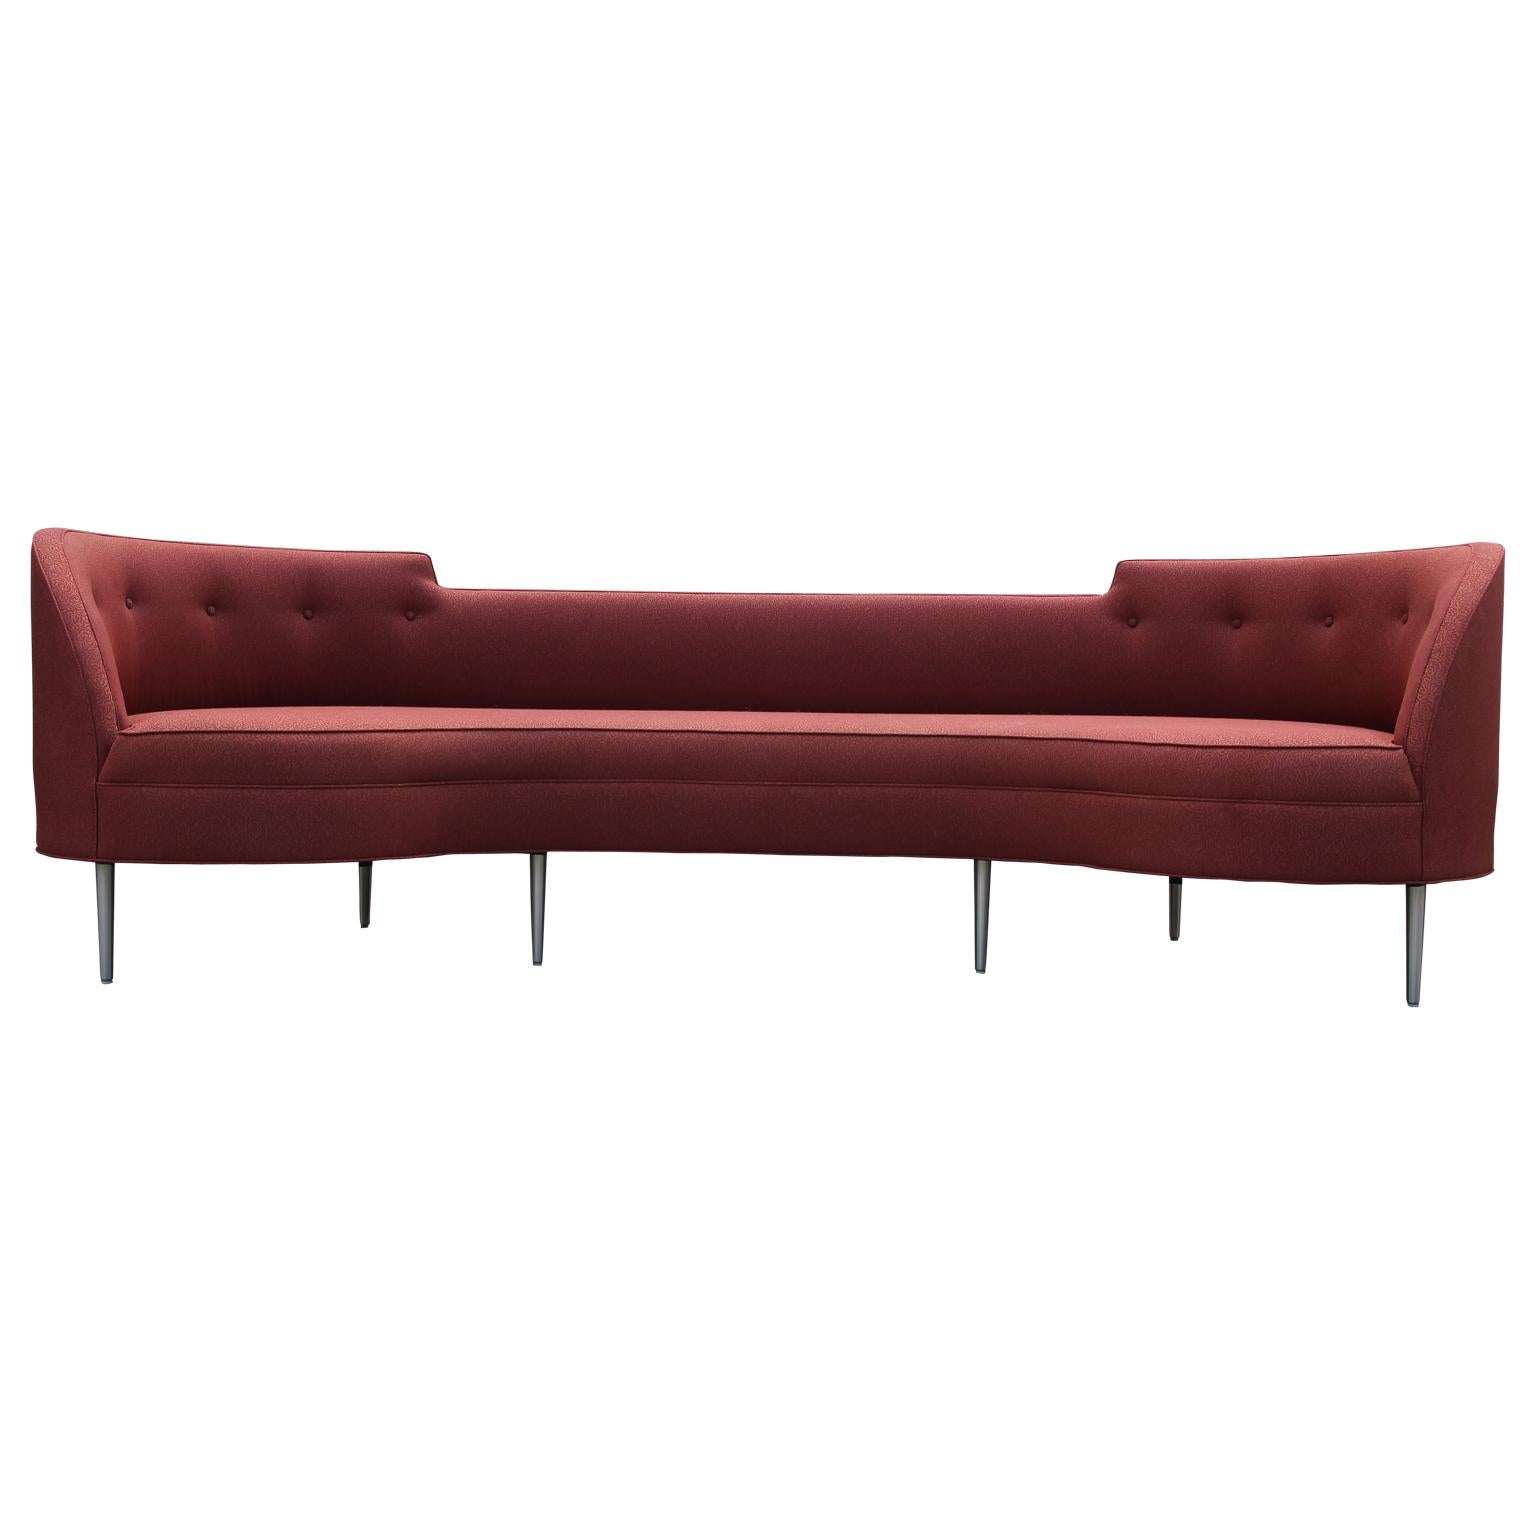 Modern curved Edward Wormley for Dunbar Red Oasis sofa
Knoll fabric is in great shape
Aluminum silver legs
Made circa 1990.
  